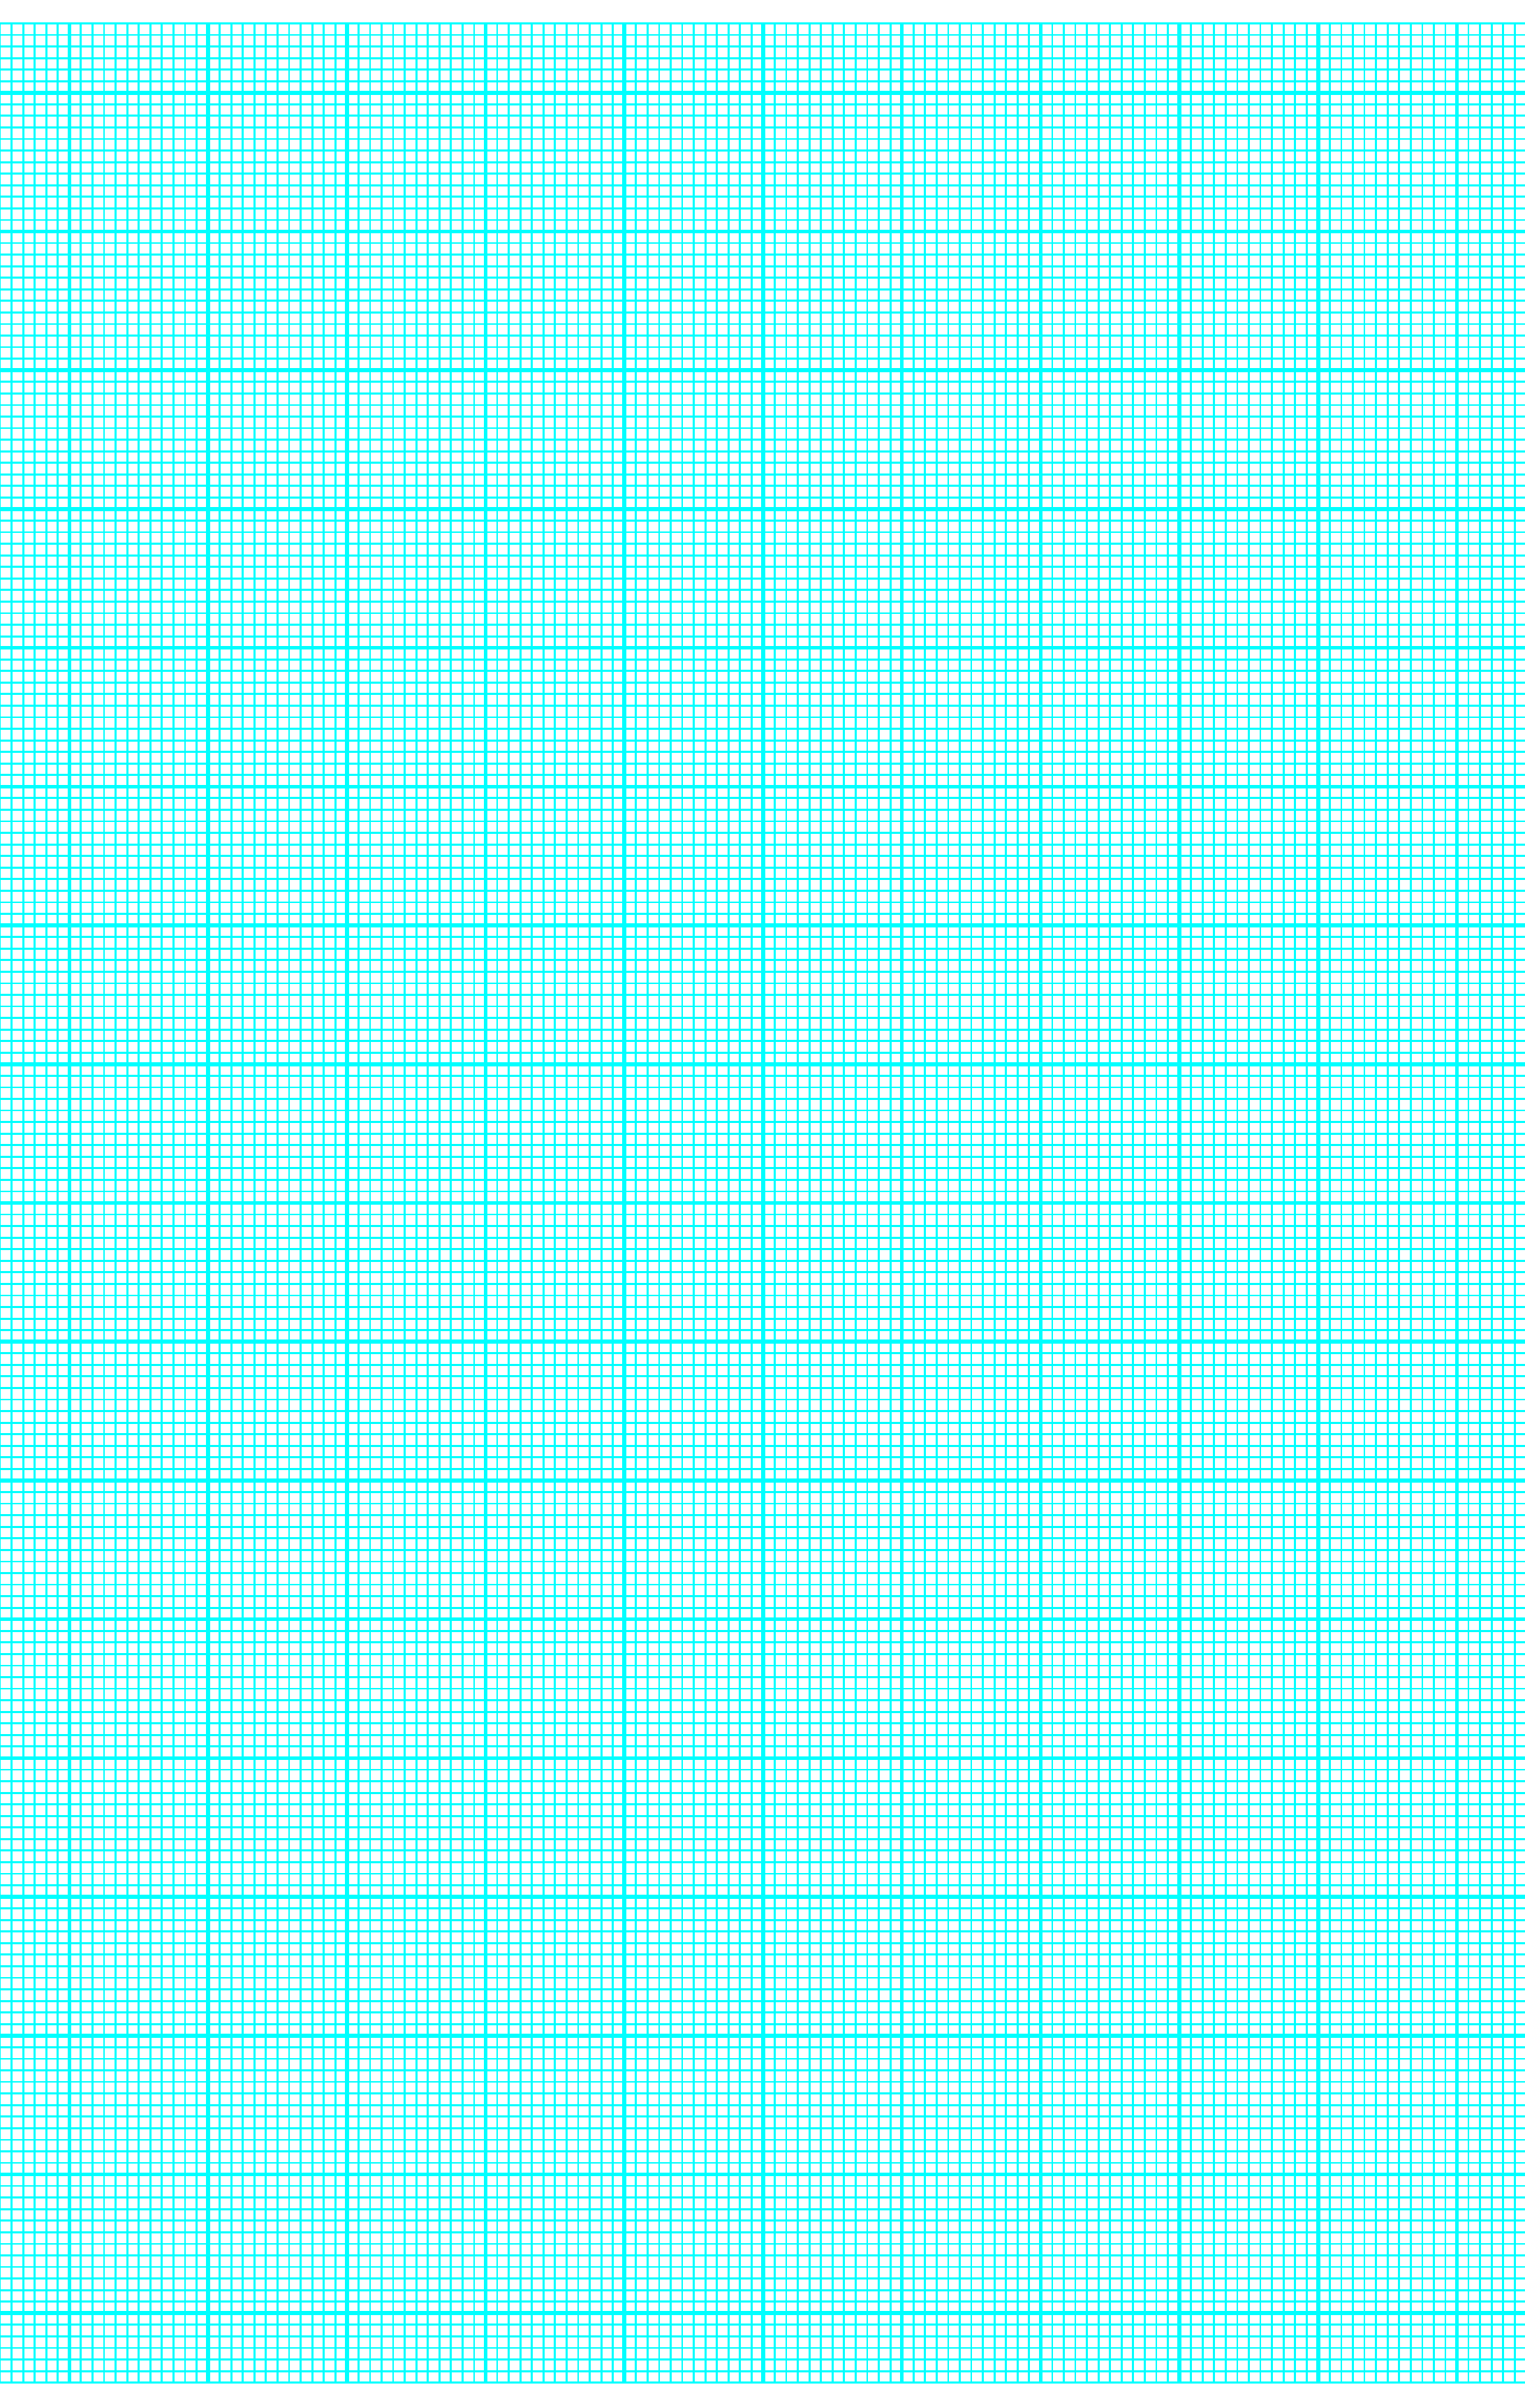 12 Lines Per Inch Graph Paper On Ledger Sized Paper Heavy Free Download